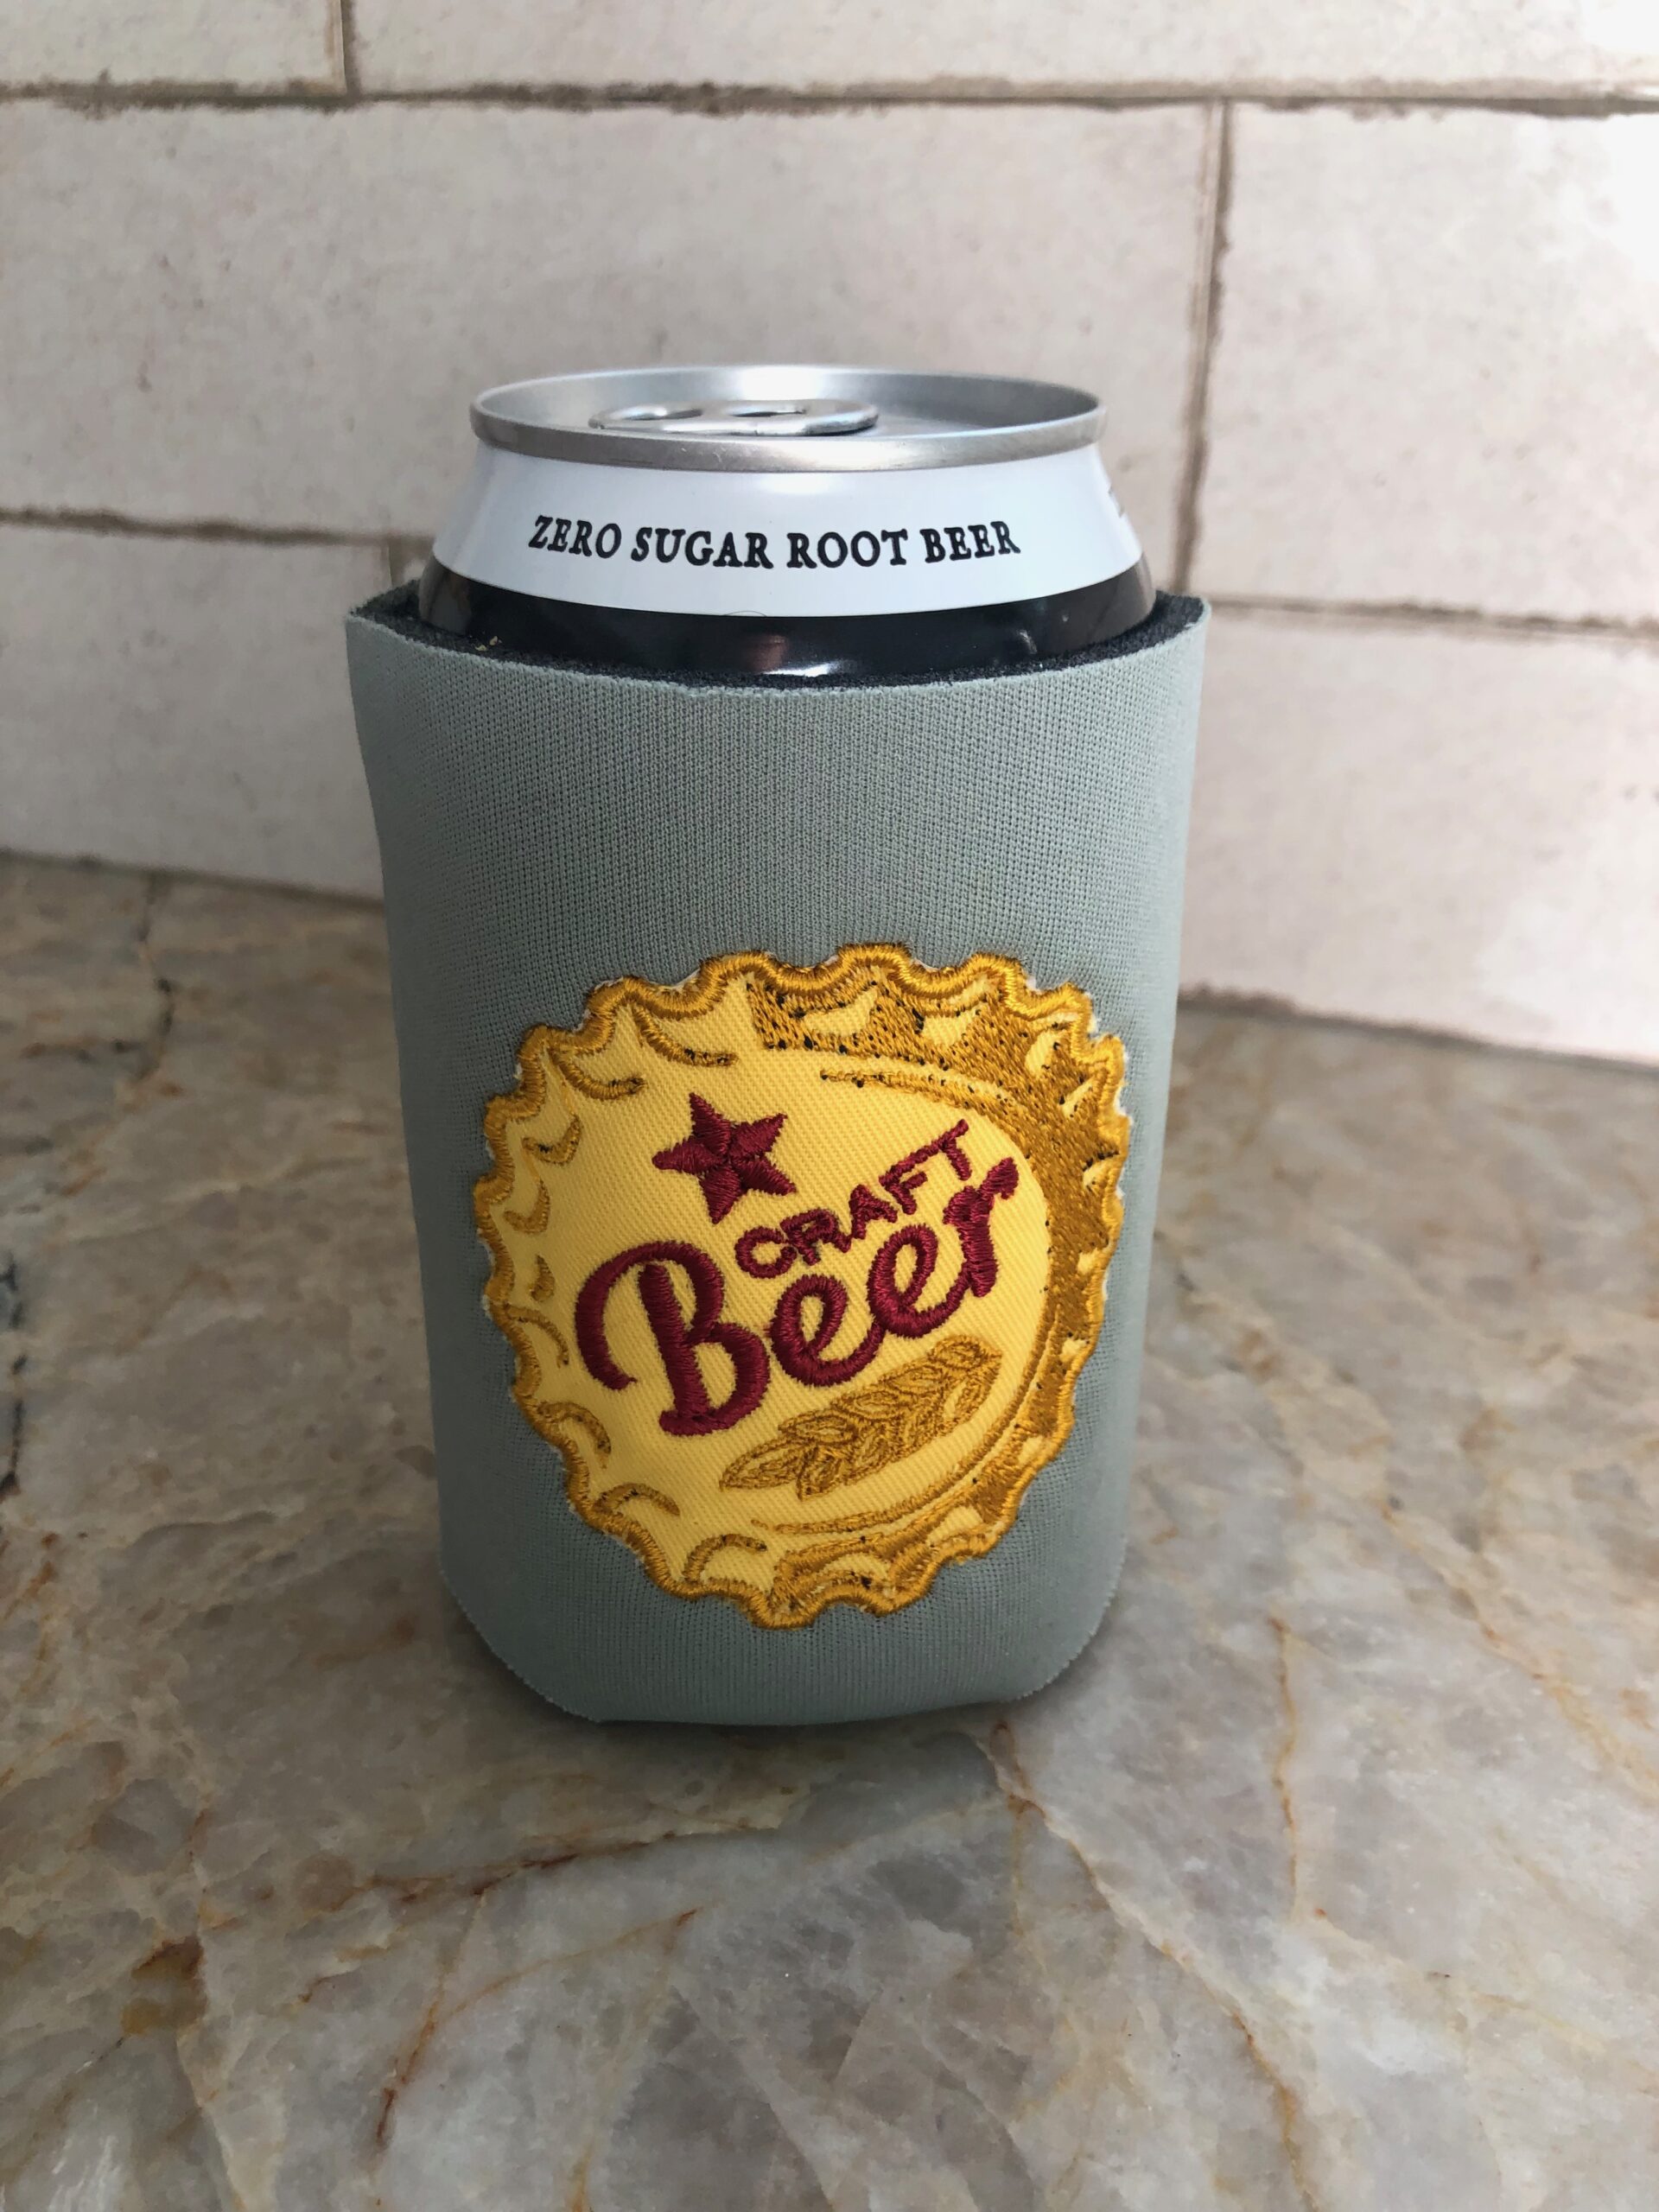 Condo Blues: How to Make Embroidered Insulated Can Koozies